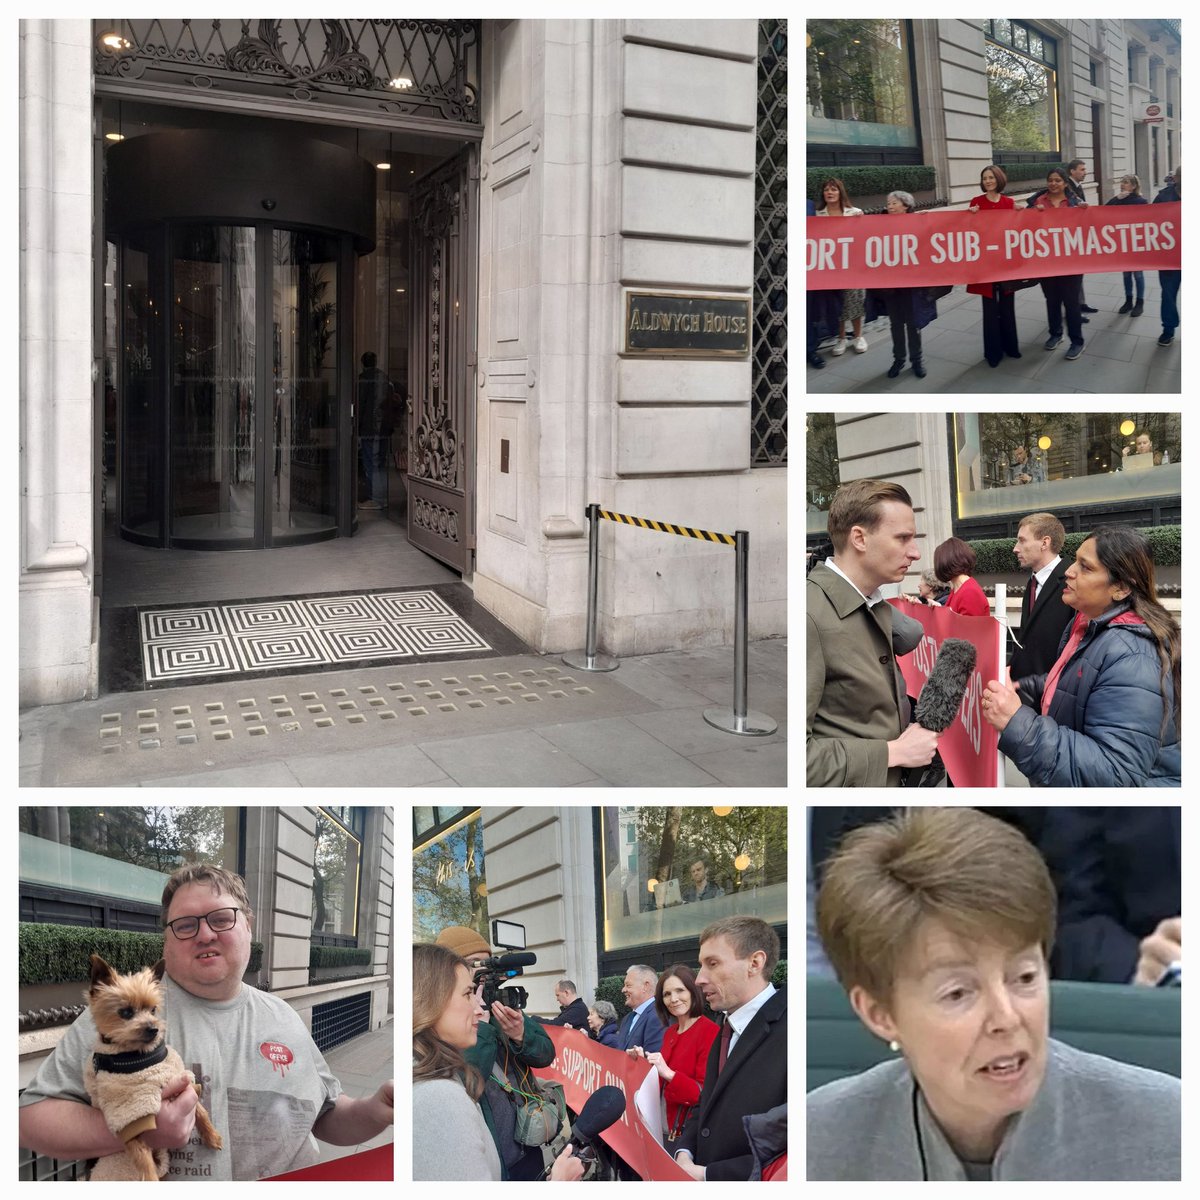 SHOW TIME WEDNESDAY 22nd MAY 8.30 onwards Join SubPostmasters & Supporters Outside Aldwych House ALDWYCH LONDON WC2A 2AZ 2 show support to 555 & other SubPostmasters Paula Vennals appearing day 1 of 3 @Janetsk20073533 @ArchNichola @SeemaMisra7 @ElCShaikh @tim_brentnall @Karlfl